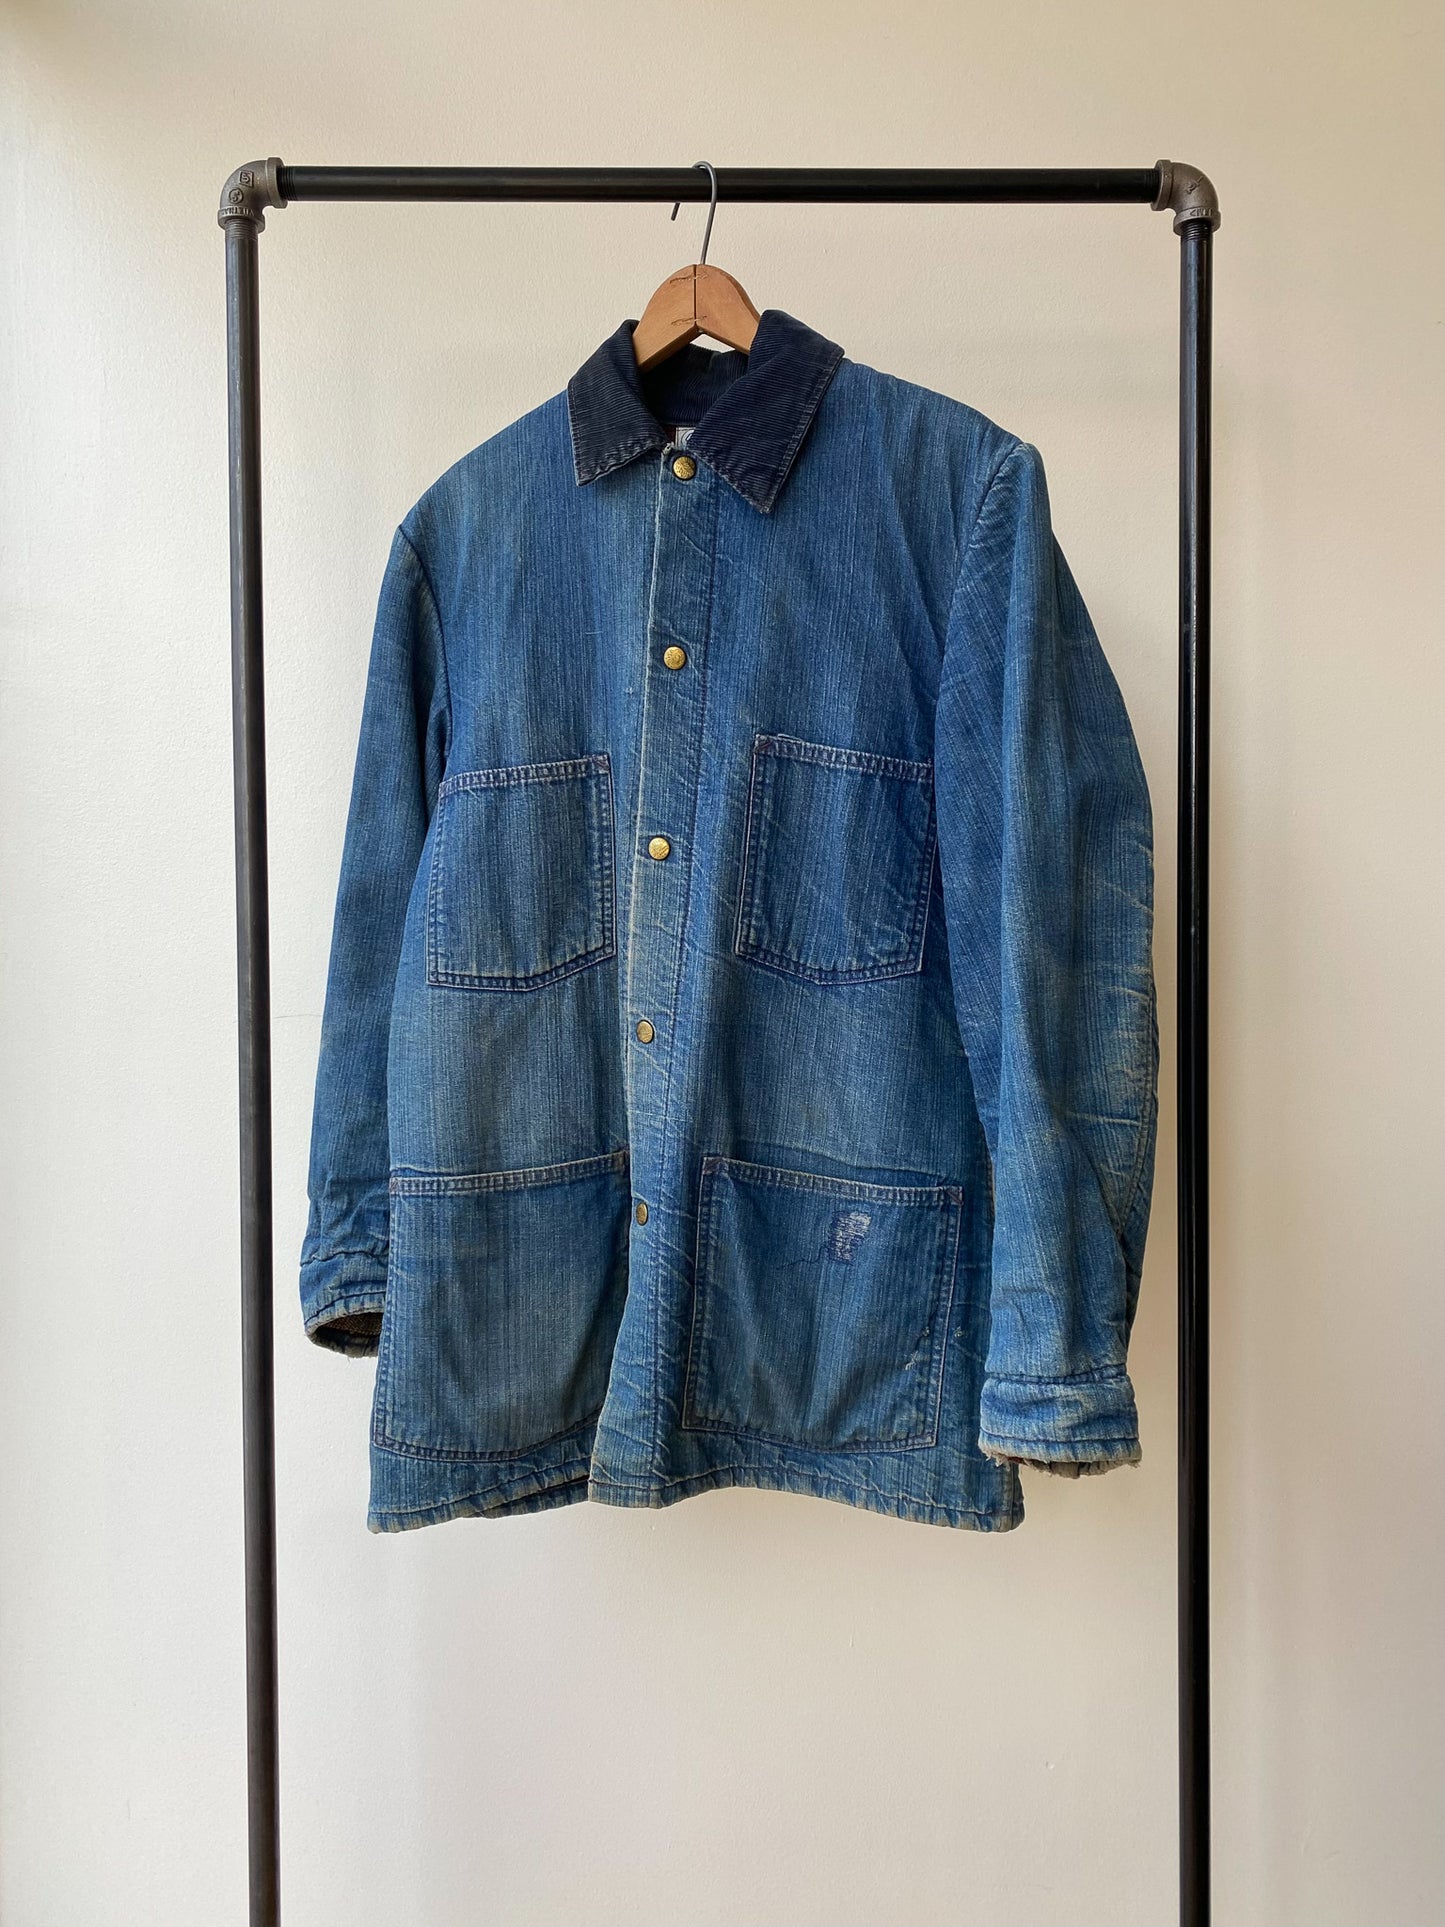 Carters Blanked Lined Denim Chore Coat—[M]